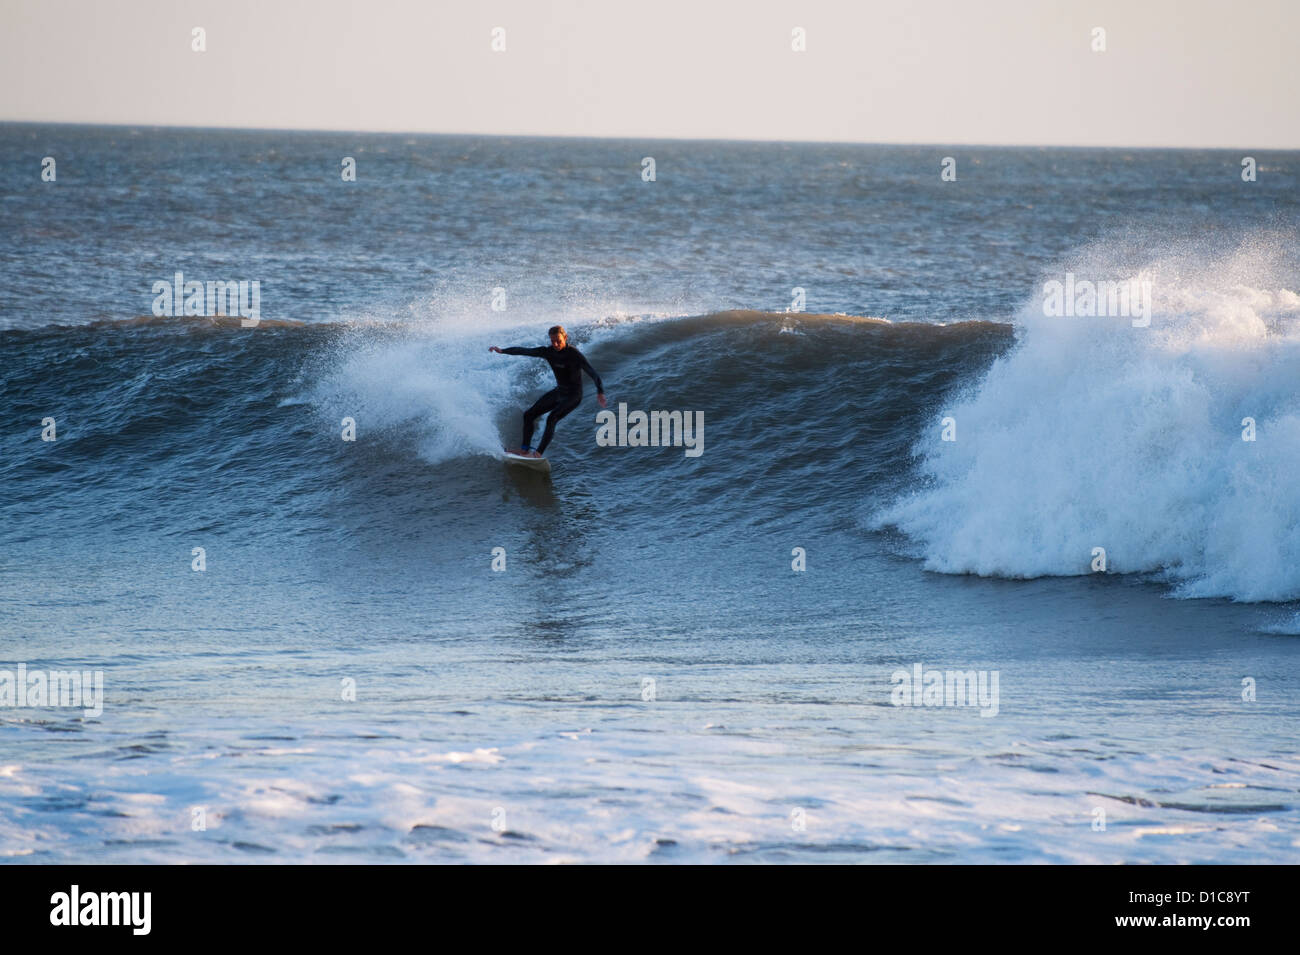 Man surfing at Anchor Point, Taghazout, Morocco Stock Photo